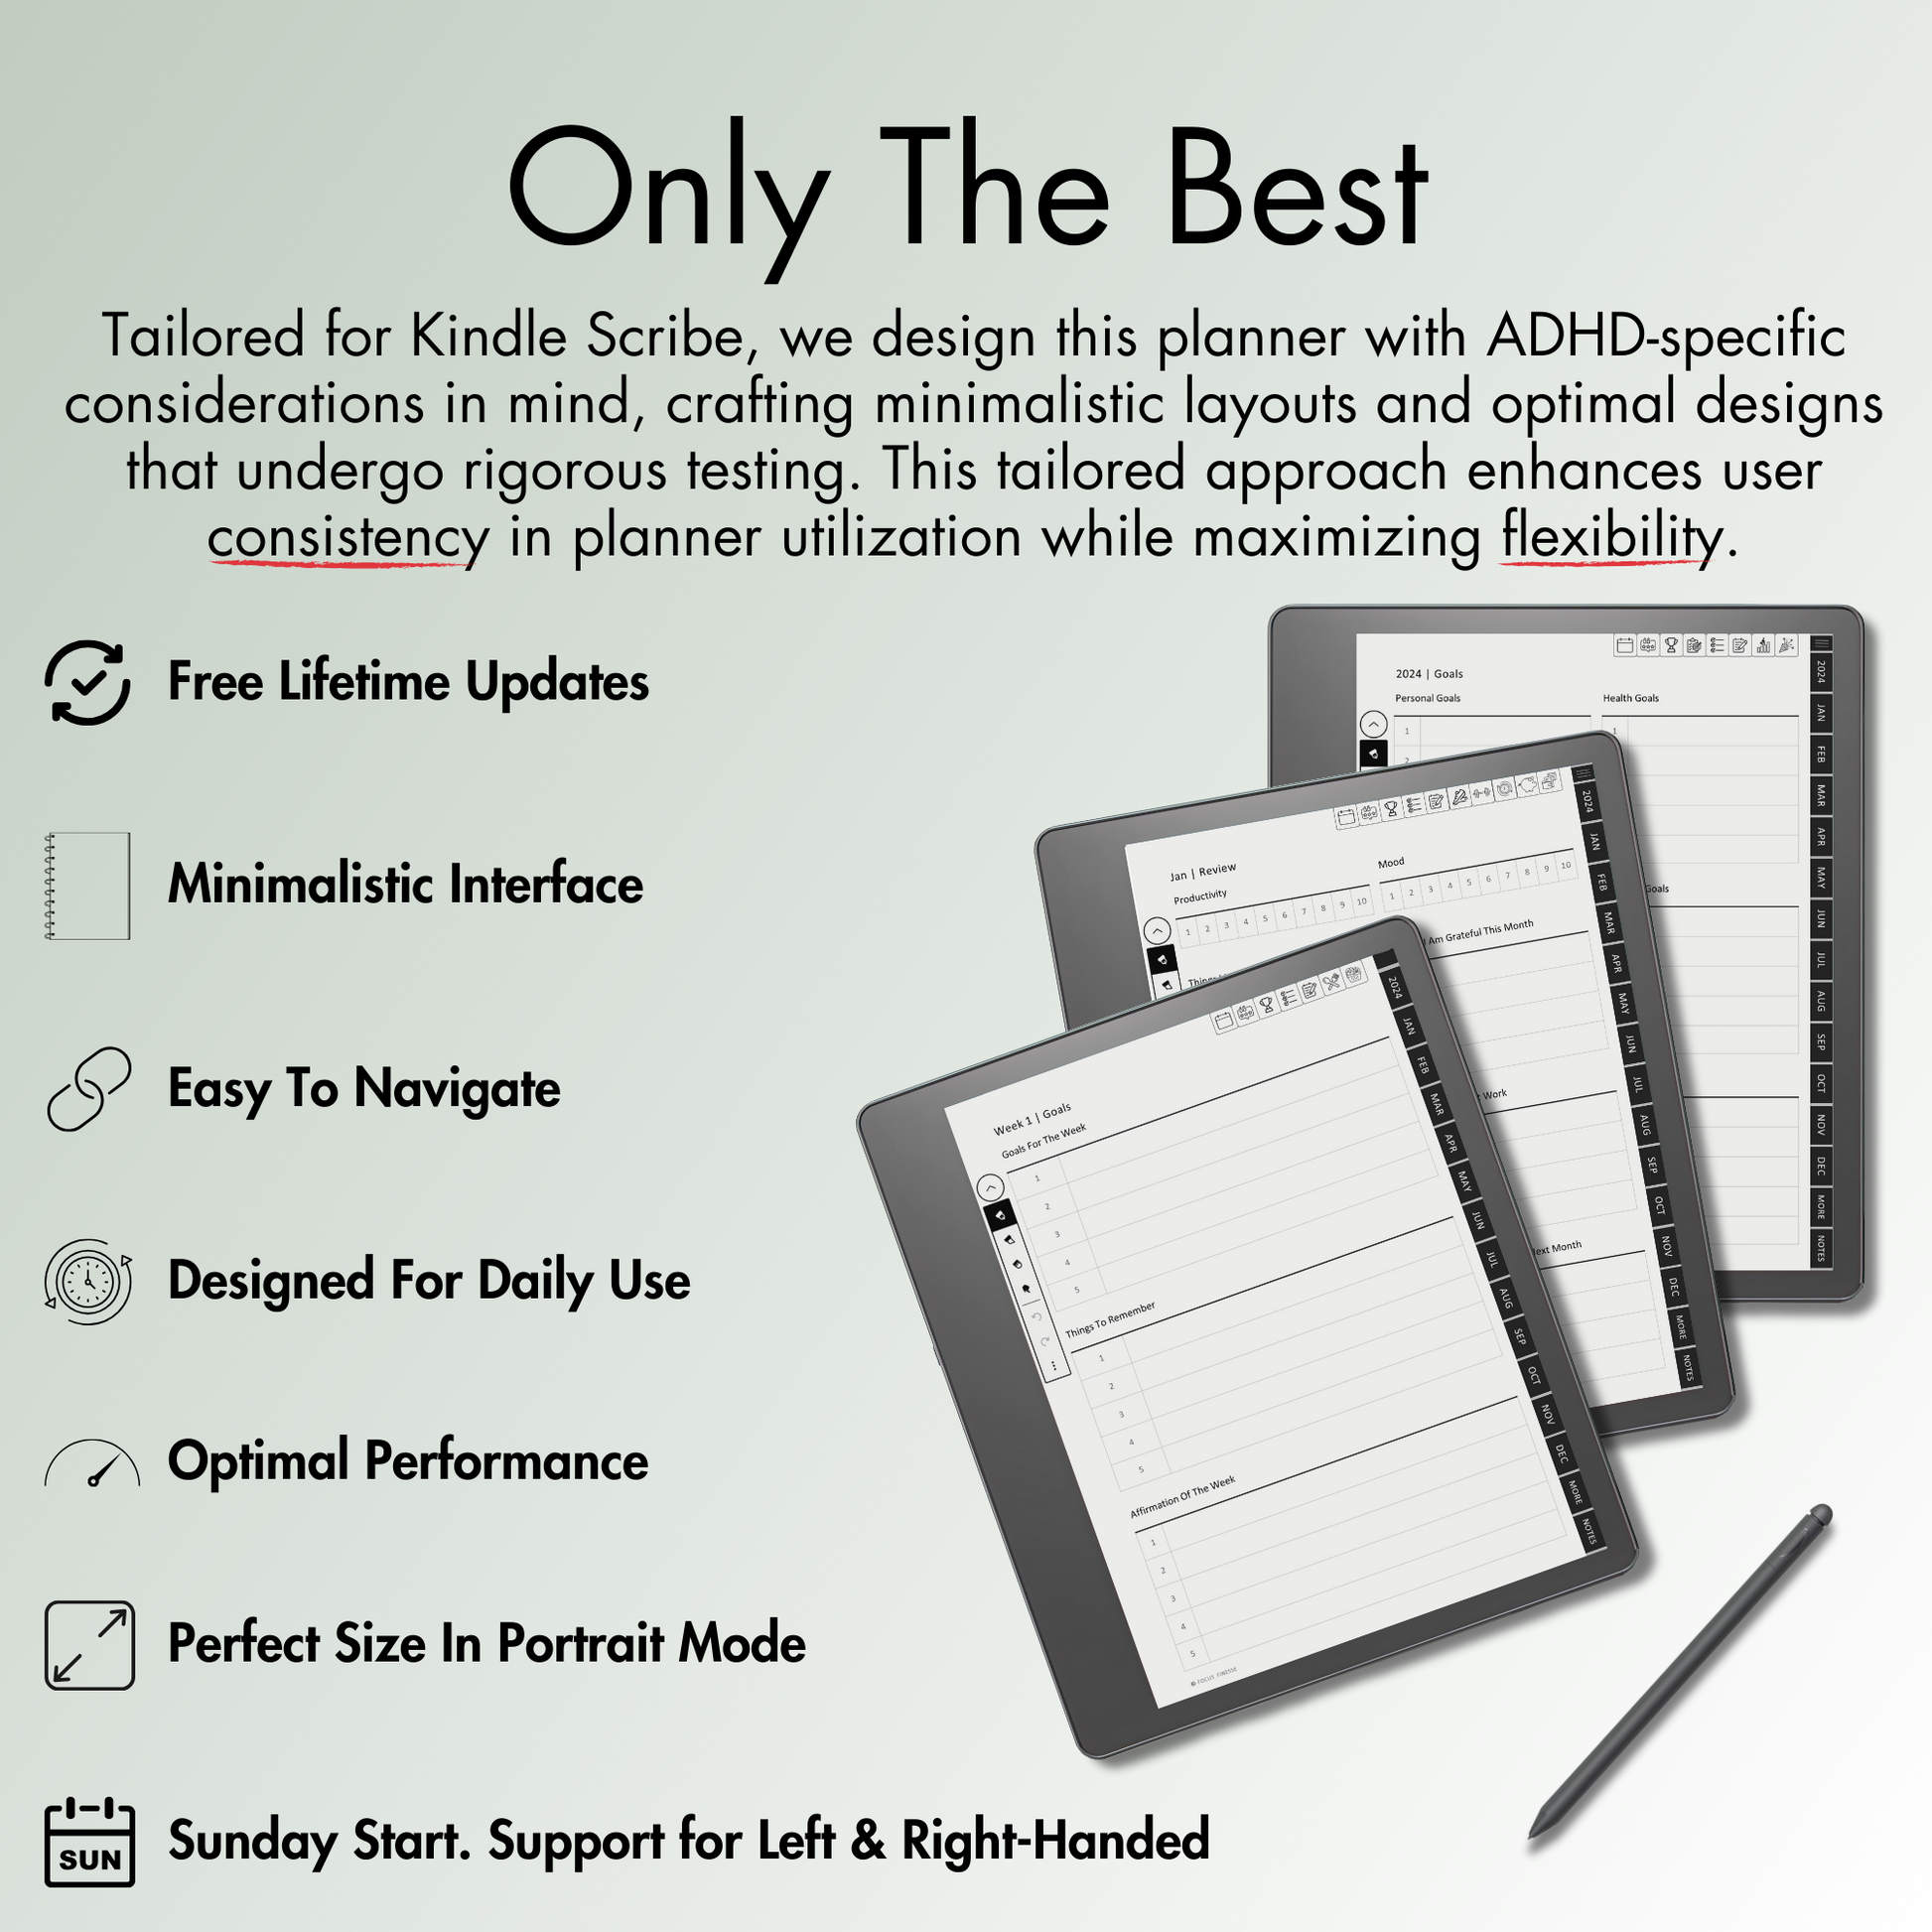 Kindle Scribe Planner. Kindle Scribe Templates.